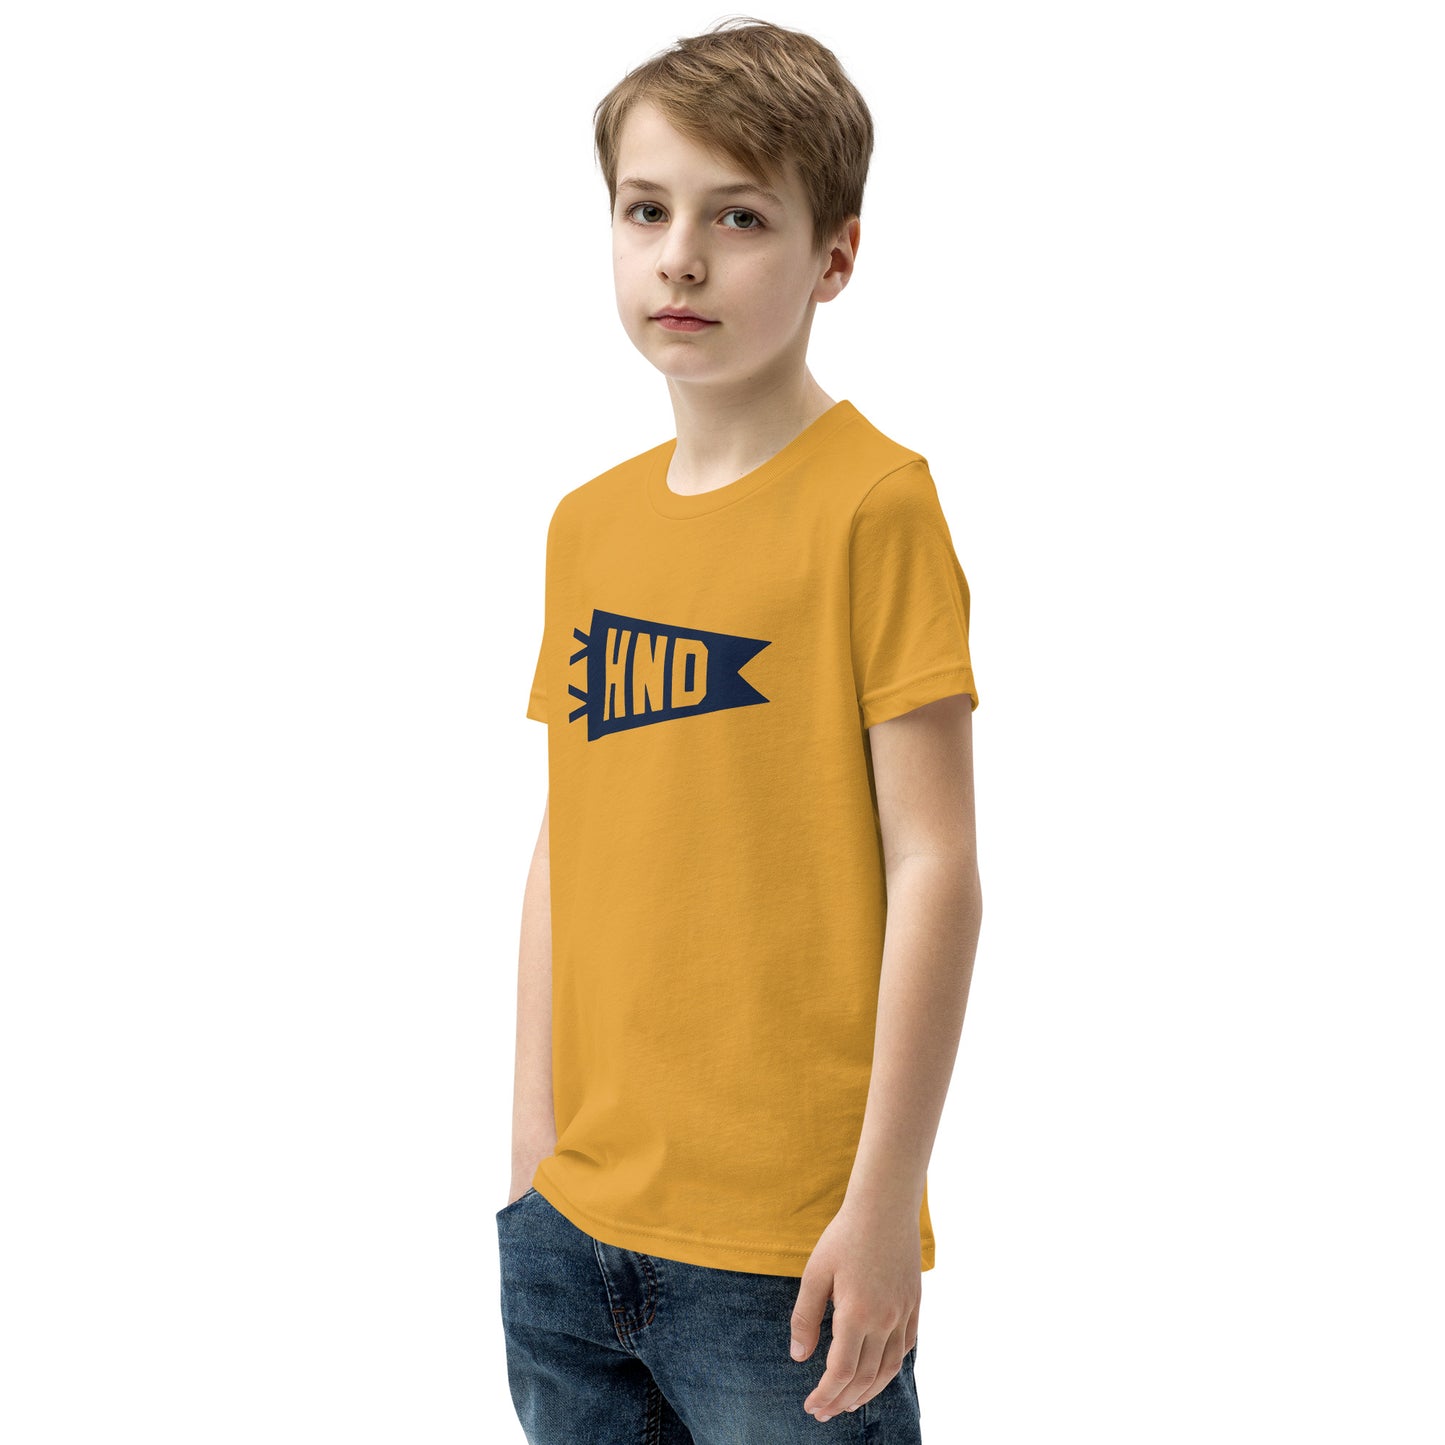 Kid's Airport Code Tee - Navy Blue Graphic • HND Tokyo • YHM Designs - Image 06